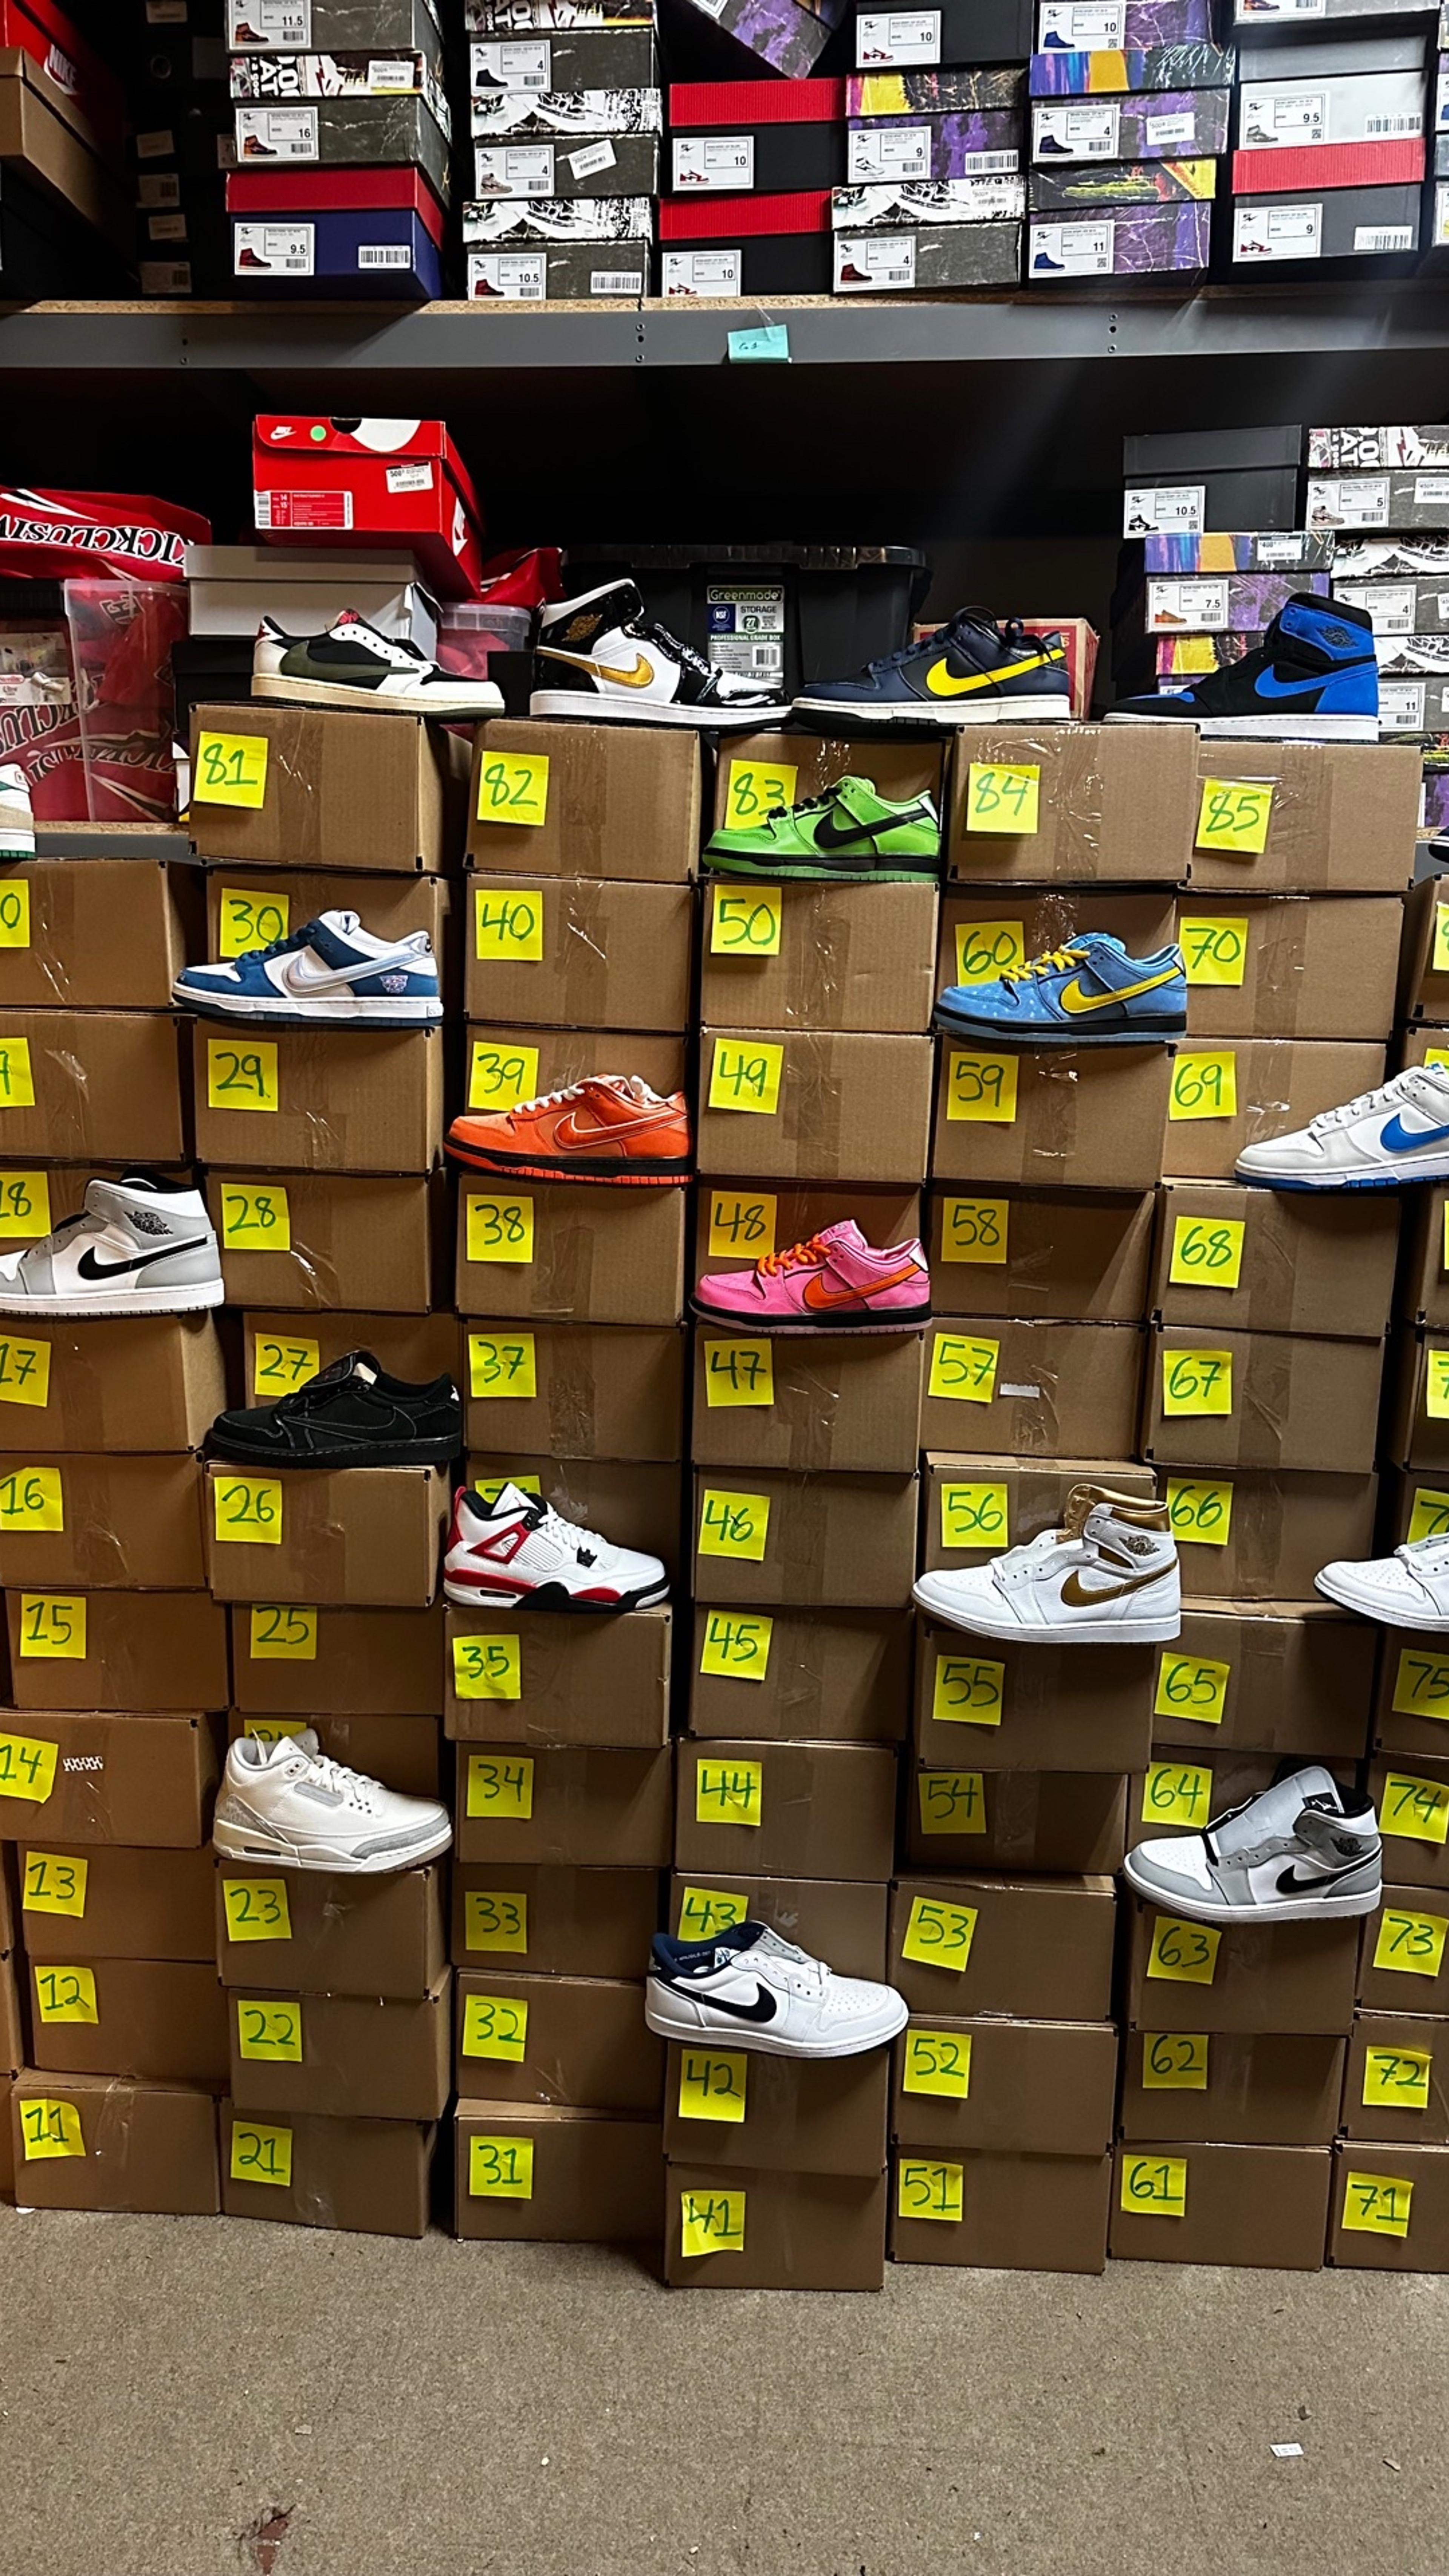 Preview image for the show titled "Every box has sneakers! Over $20,000 in prizes " at Today @ 10:00 PM